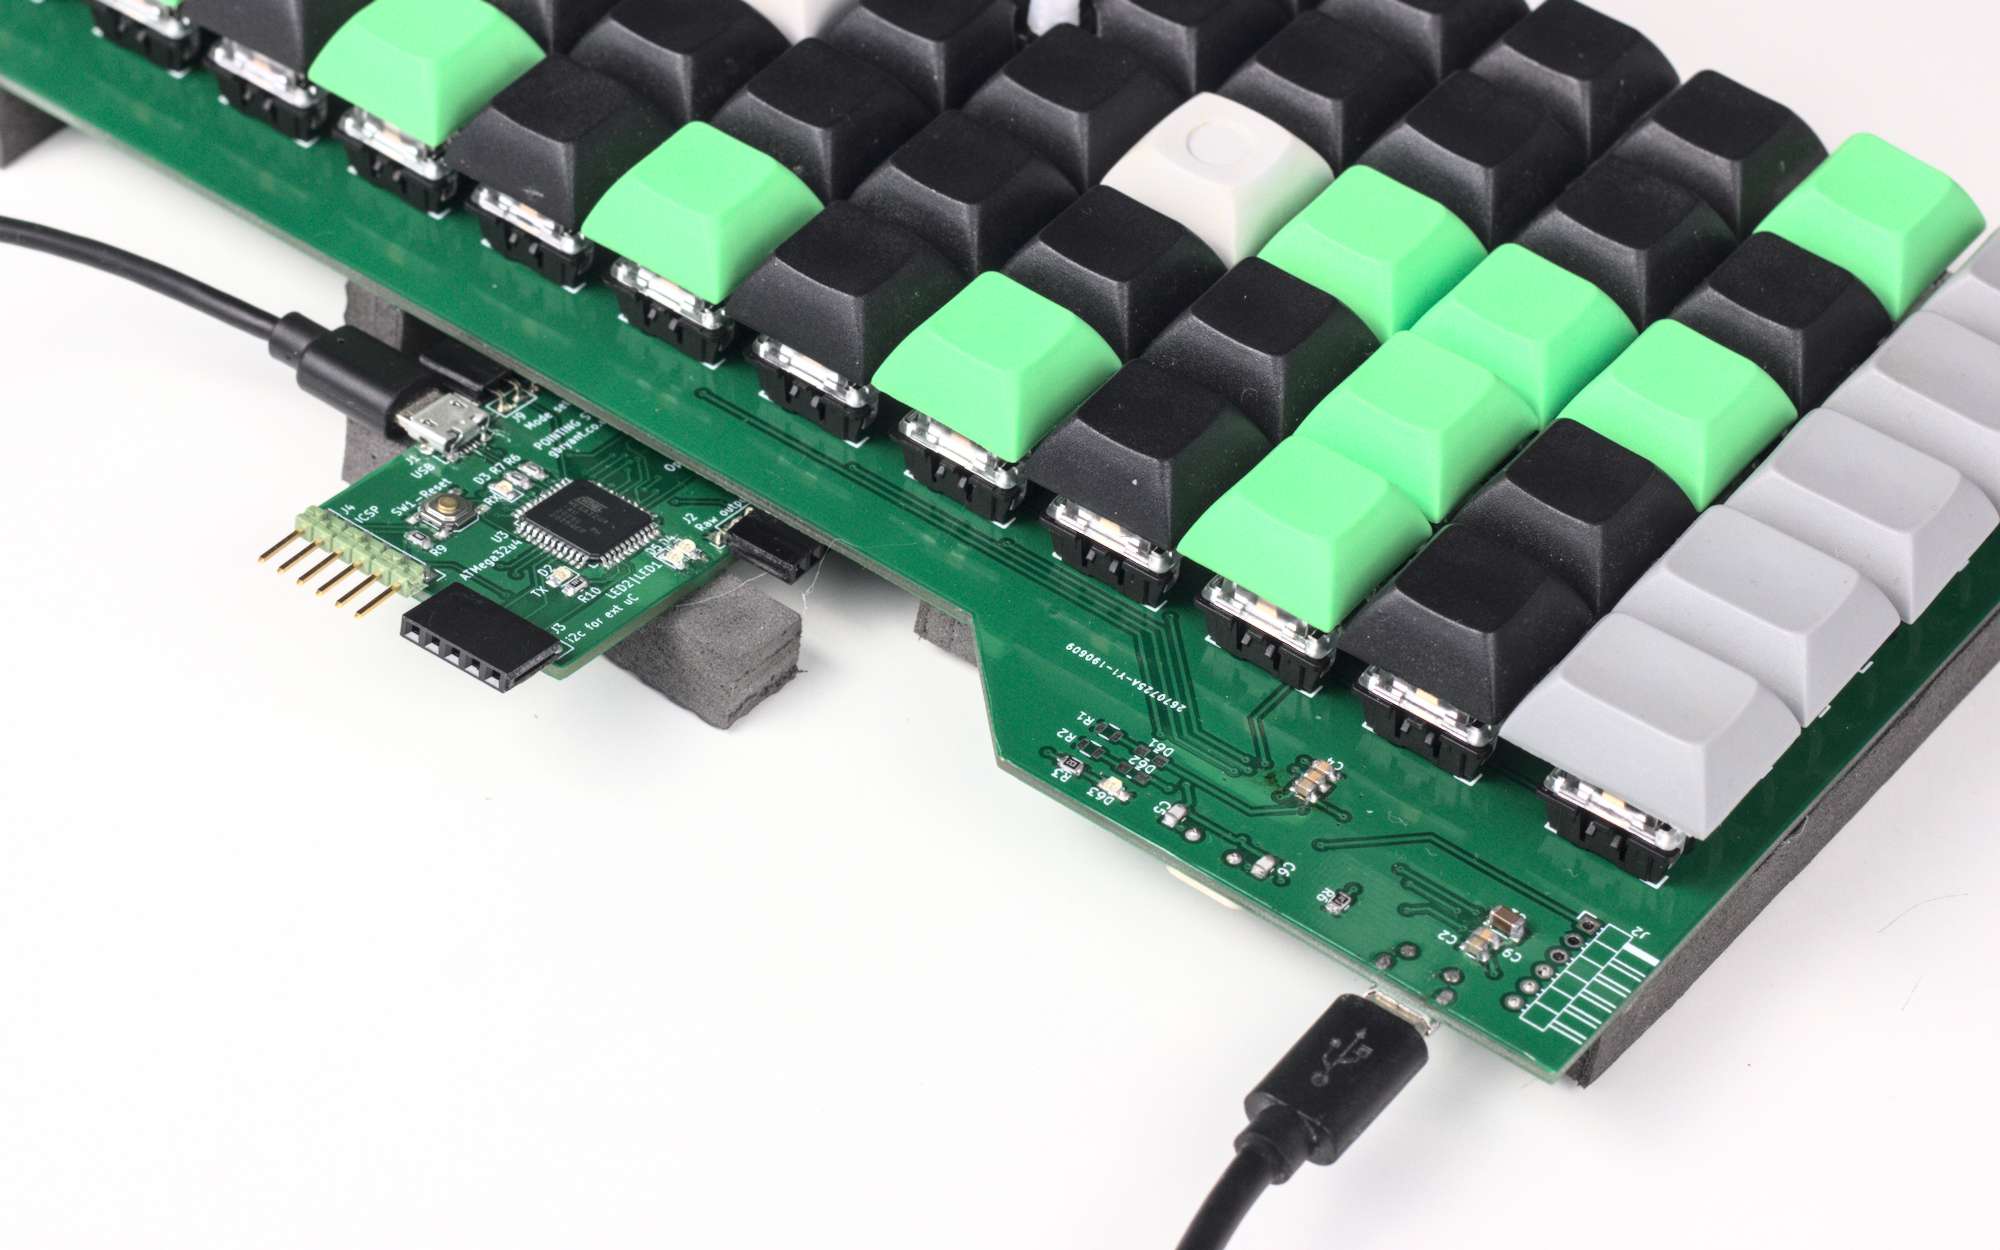 A keyboard PCB with keycaps, and another PCB sticking out from underneath